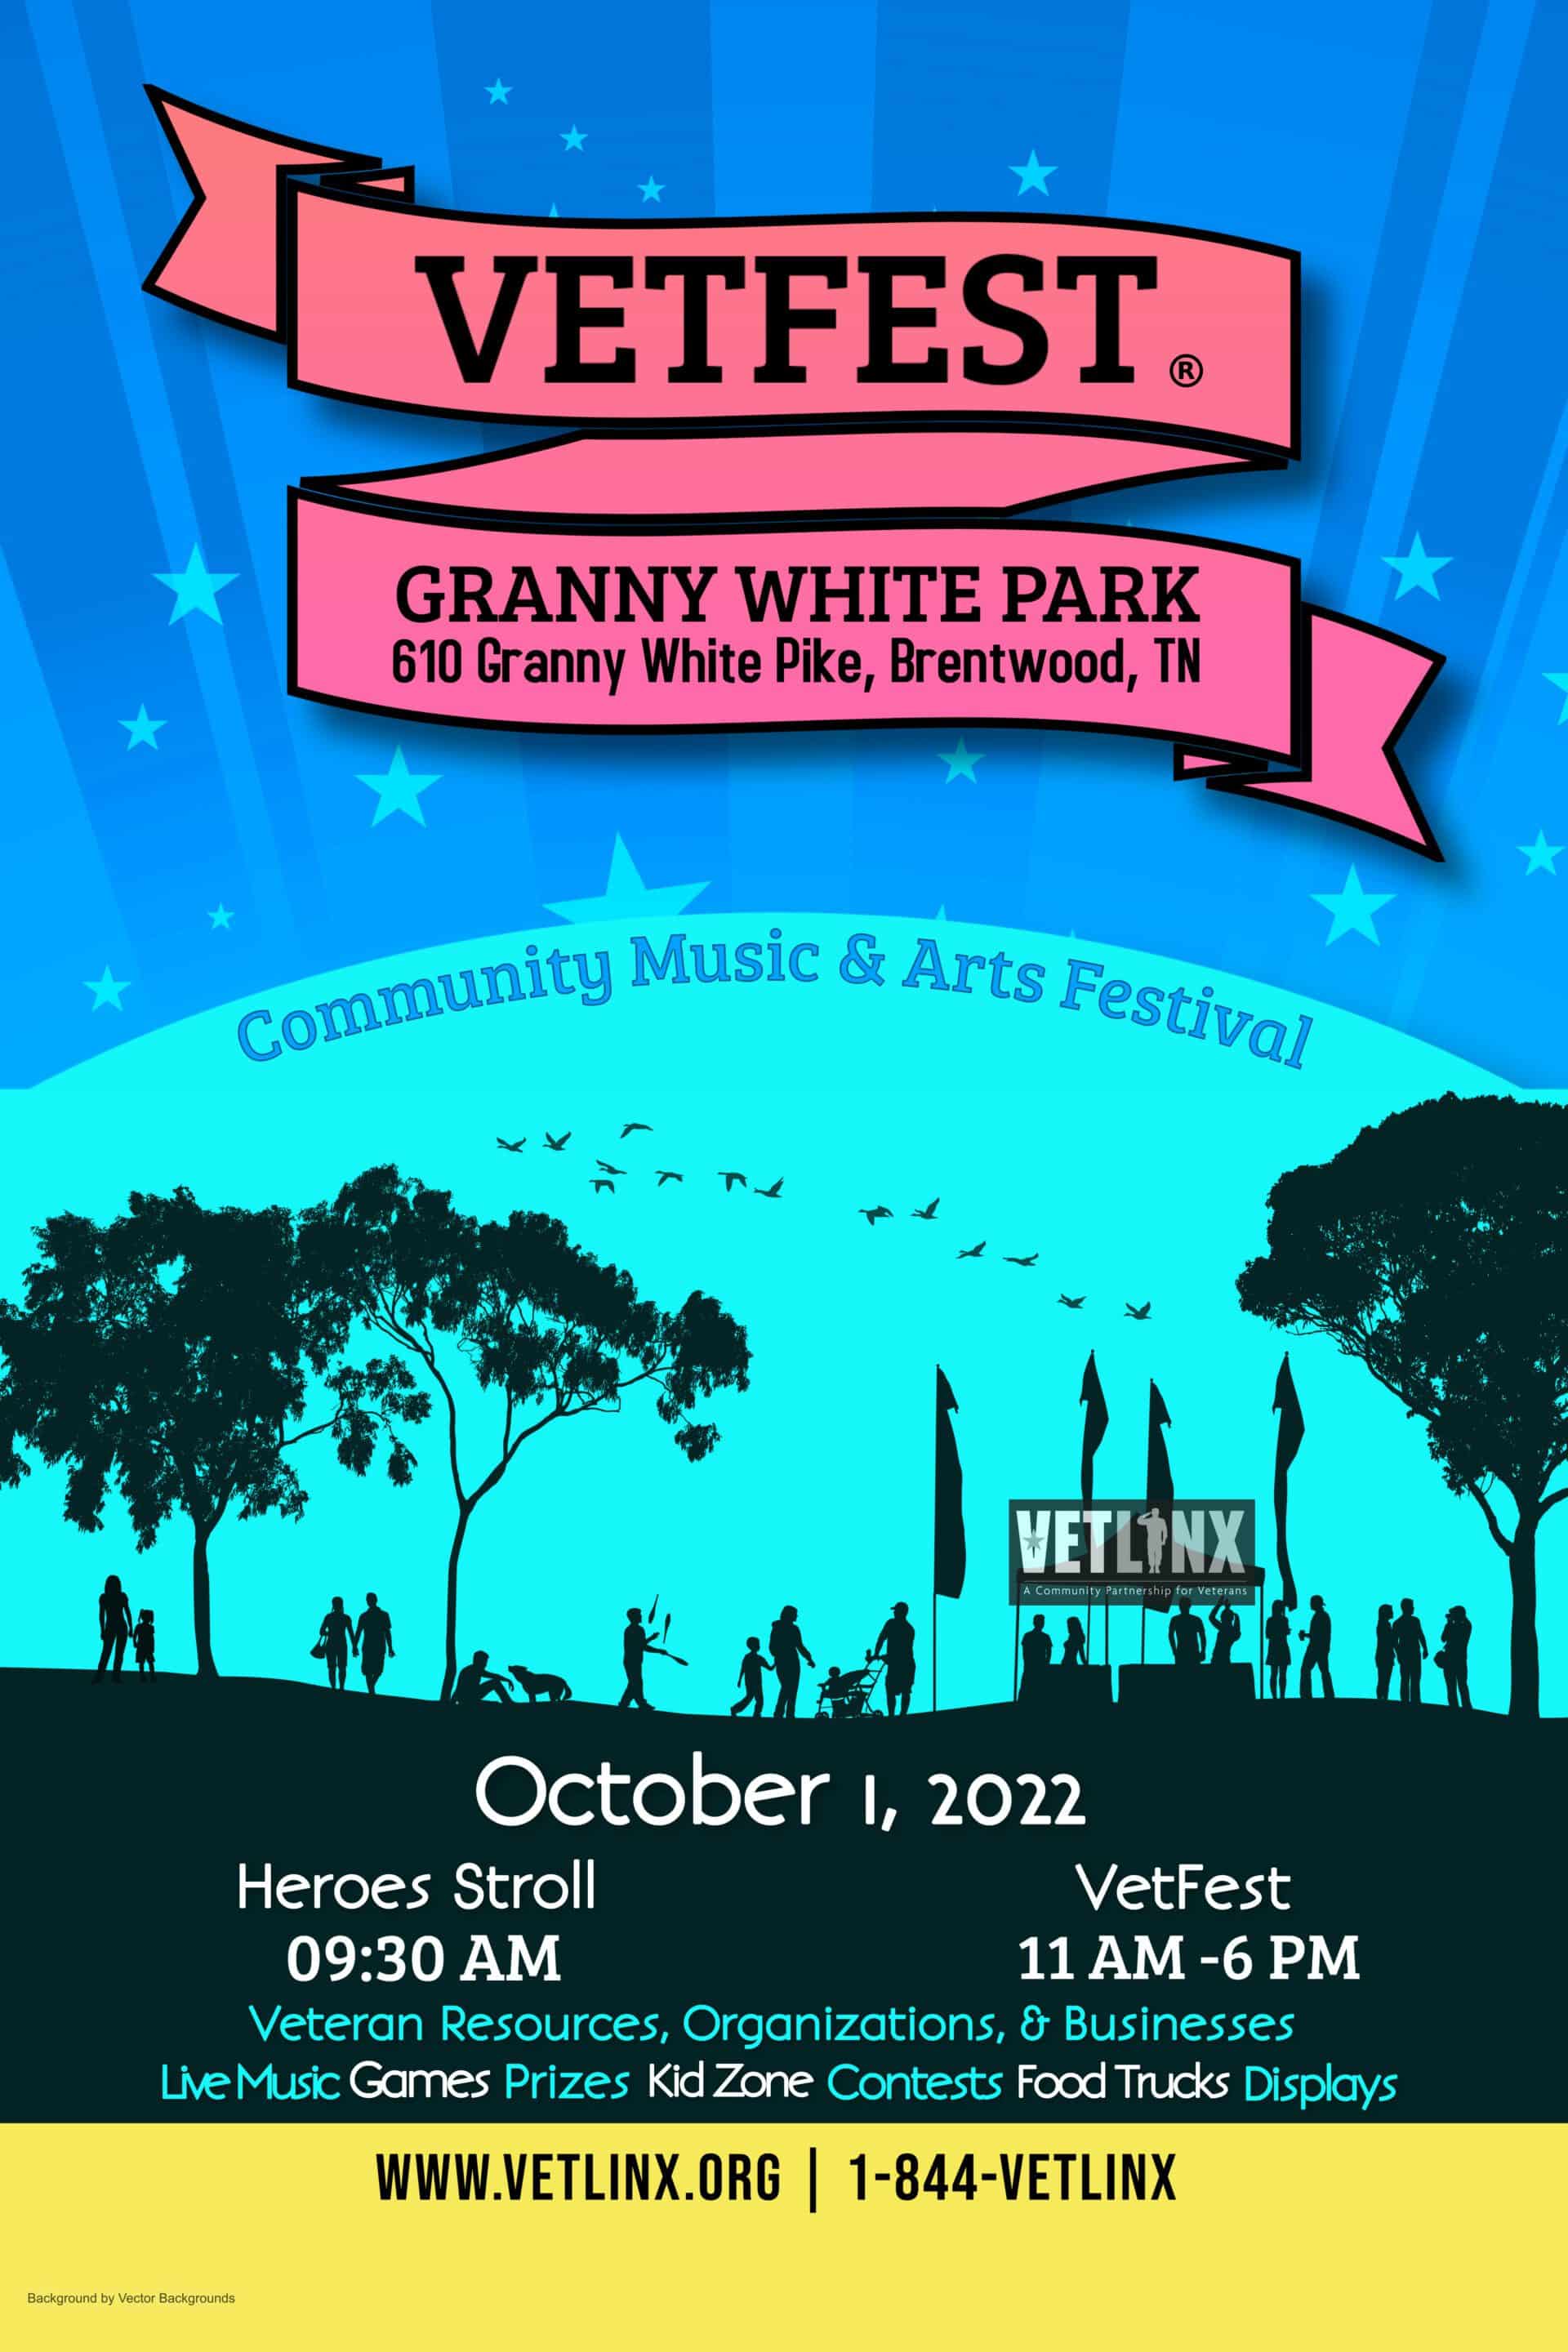 VETFEST Community Music & Arts Festival in Brentwood, TN, this event is a community music and arts festival honoring military family service and all are welcome to attend.